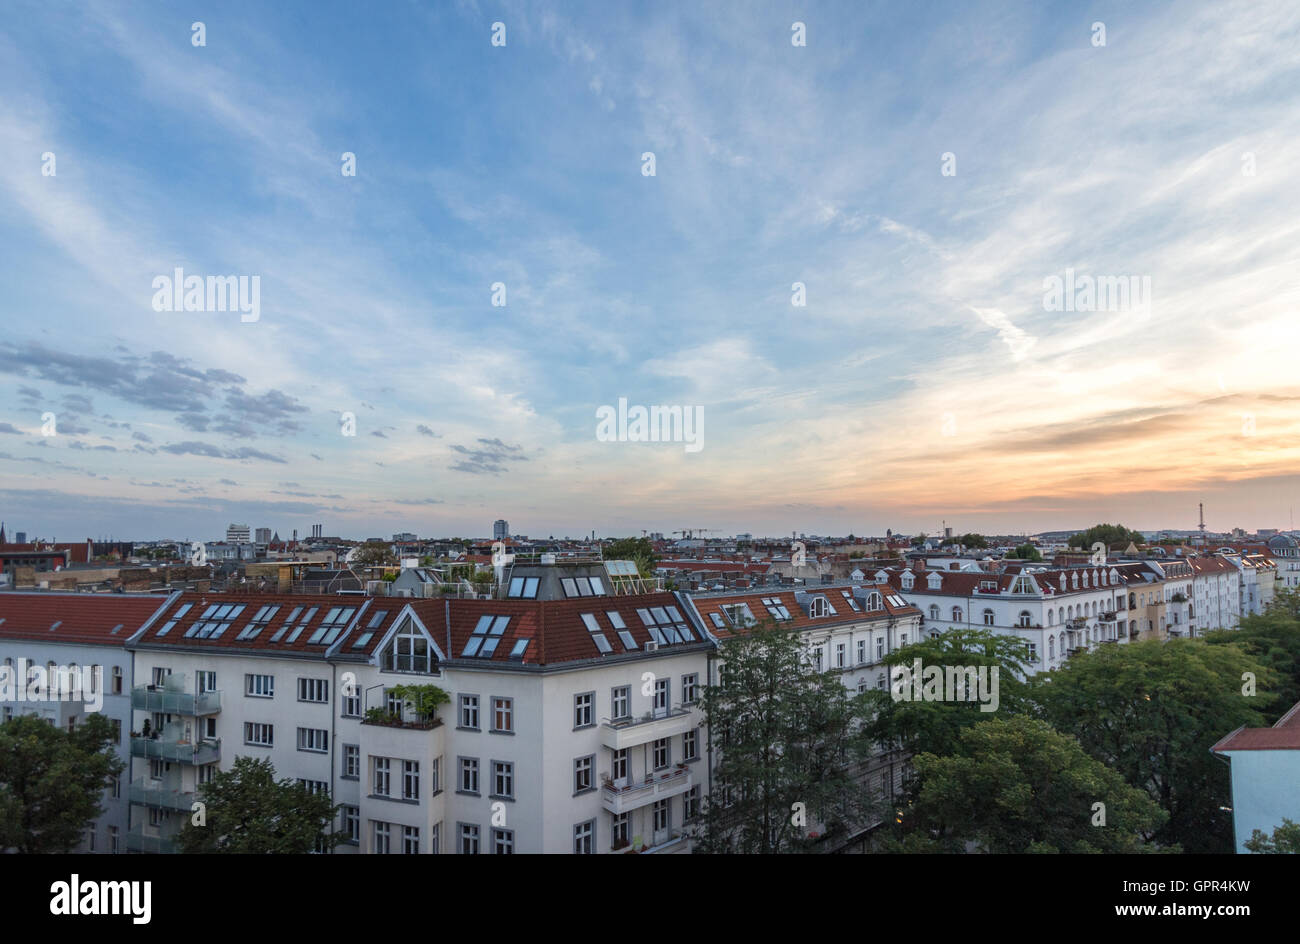 View over rooftops - city skyline at sunset Stock Photo